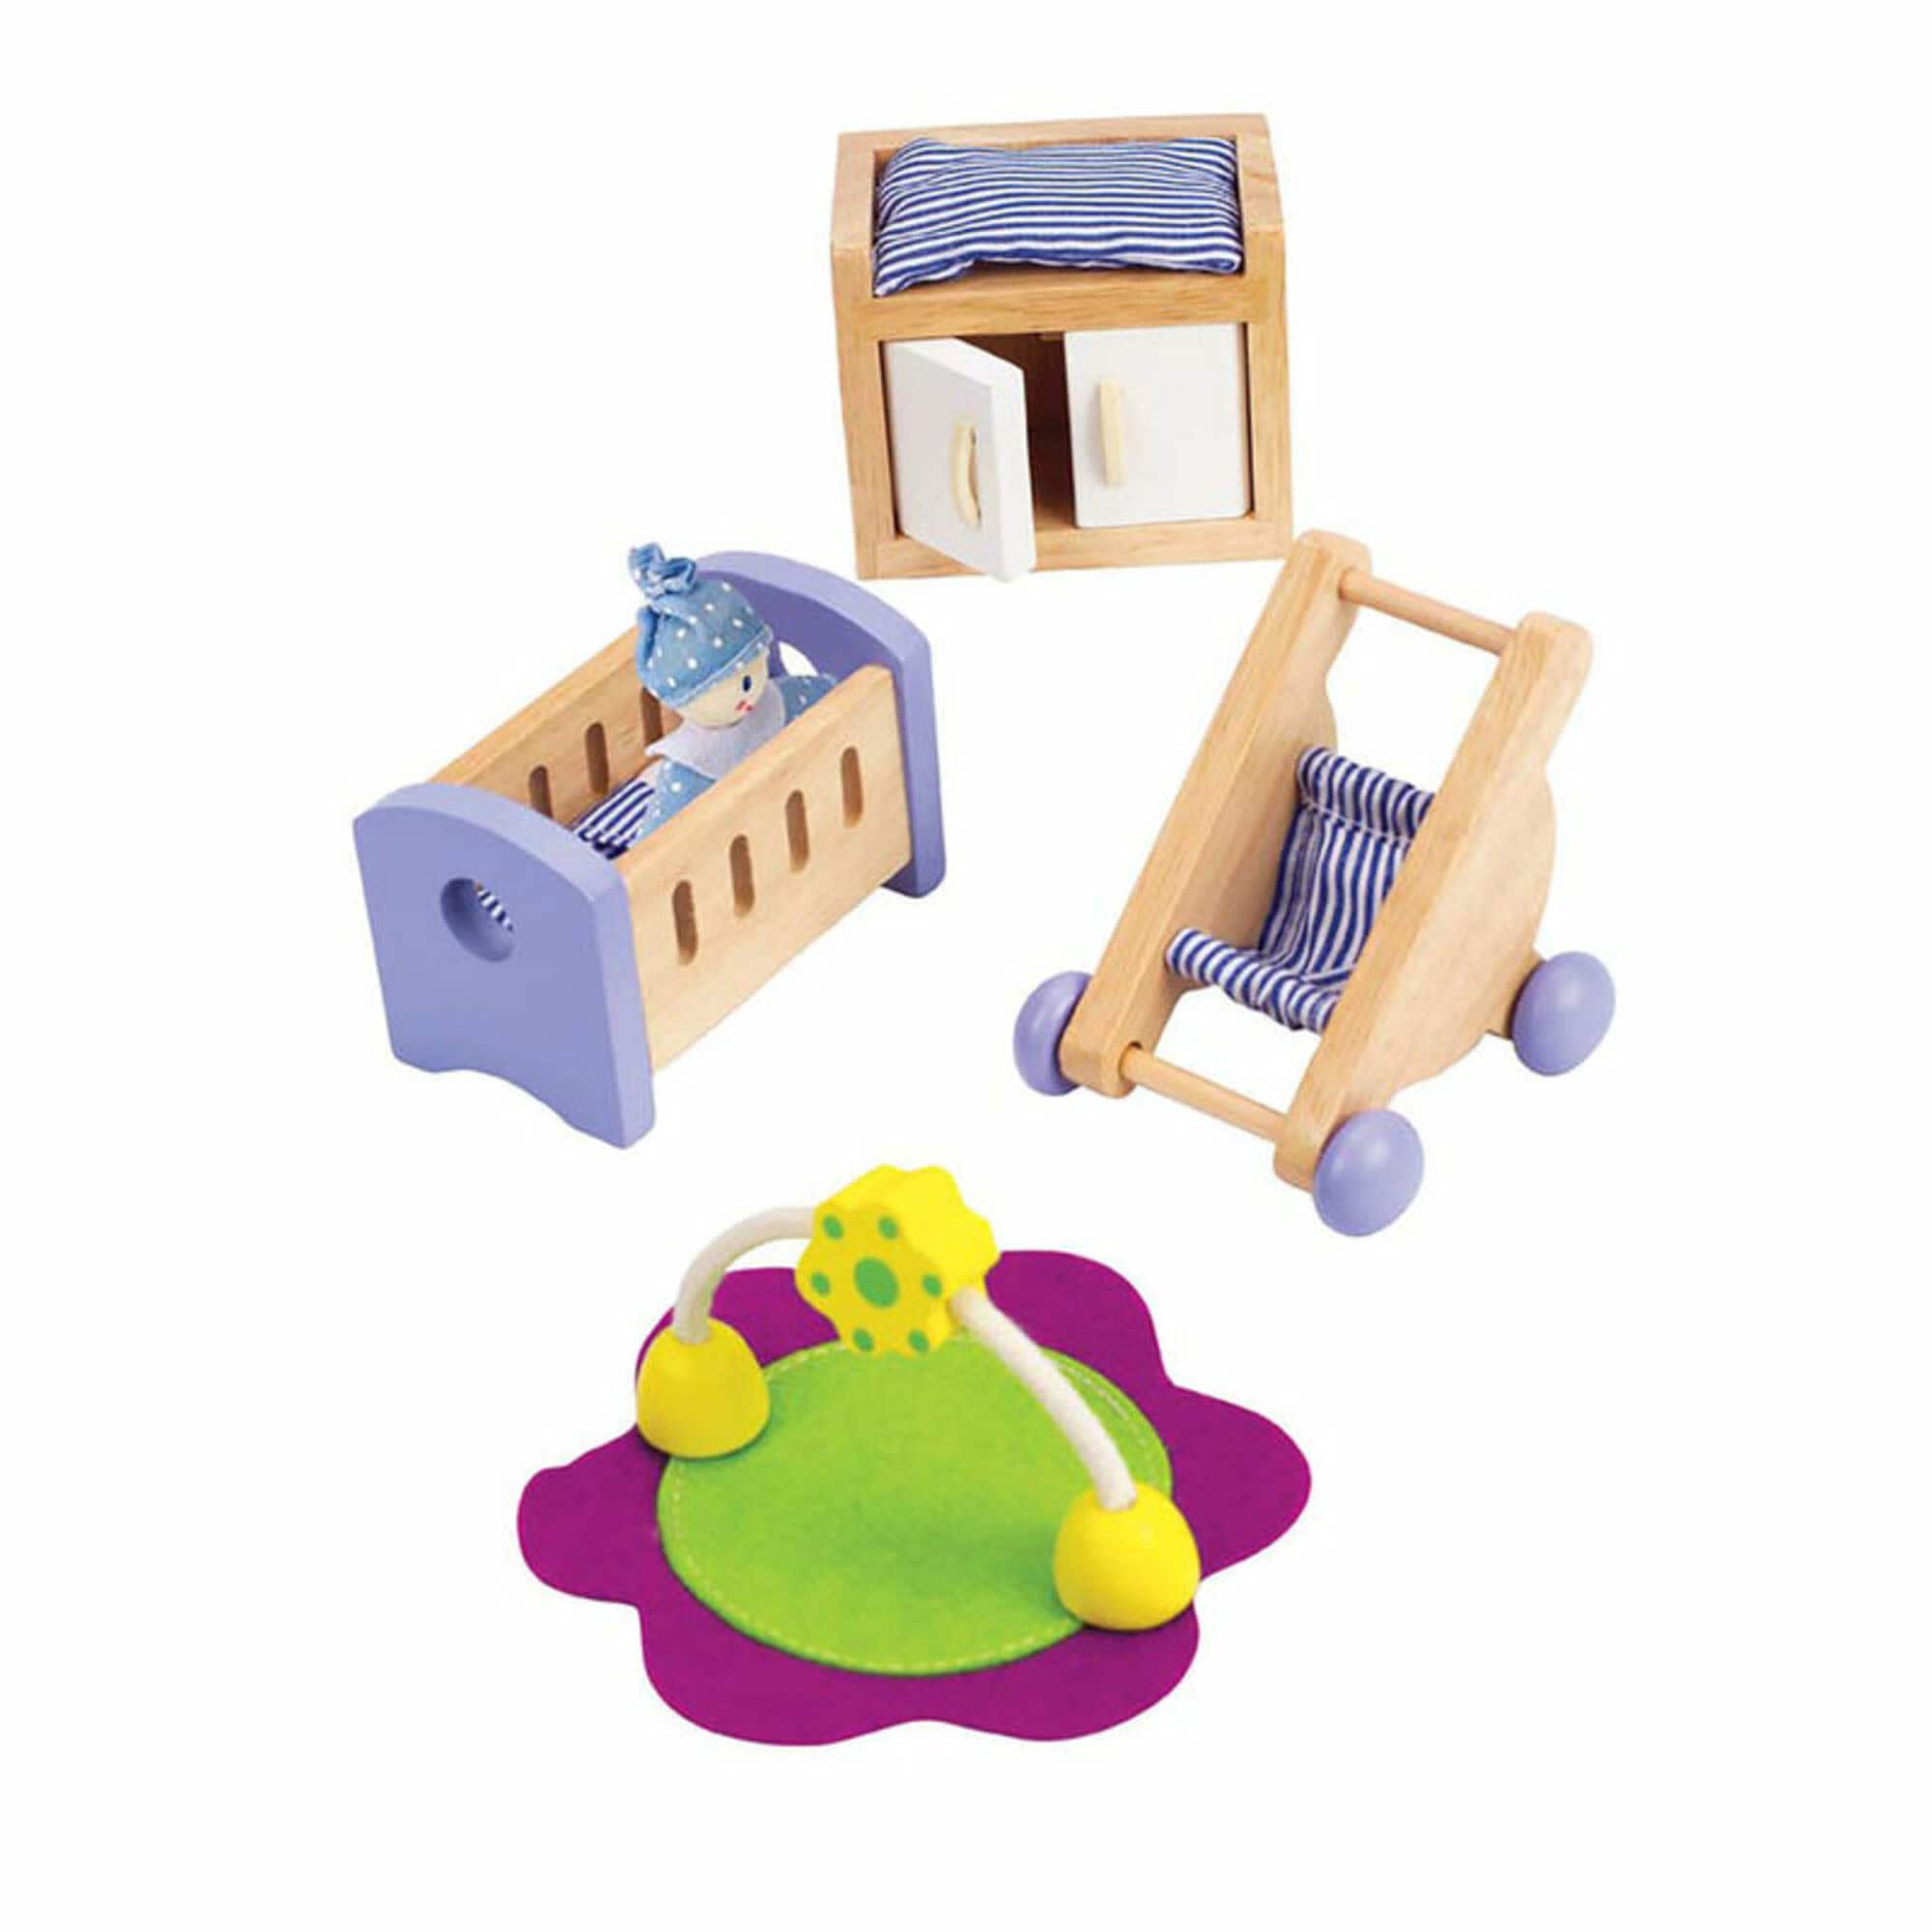 Hape Wooden Dollhouse Baby&#x27;s Room Furniture Set